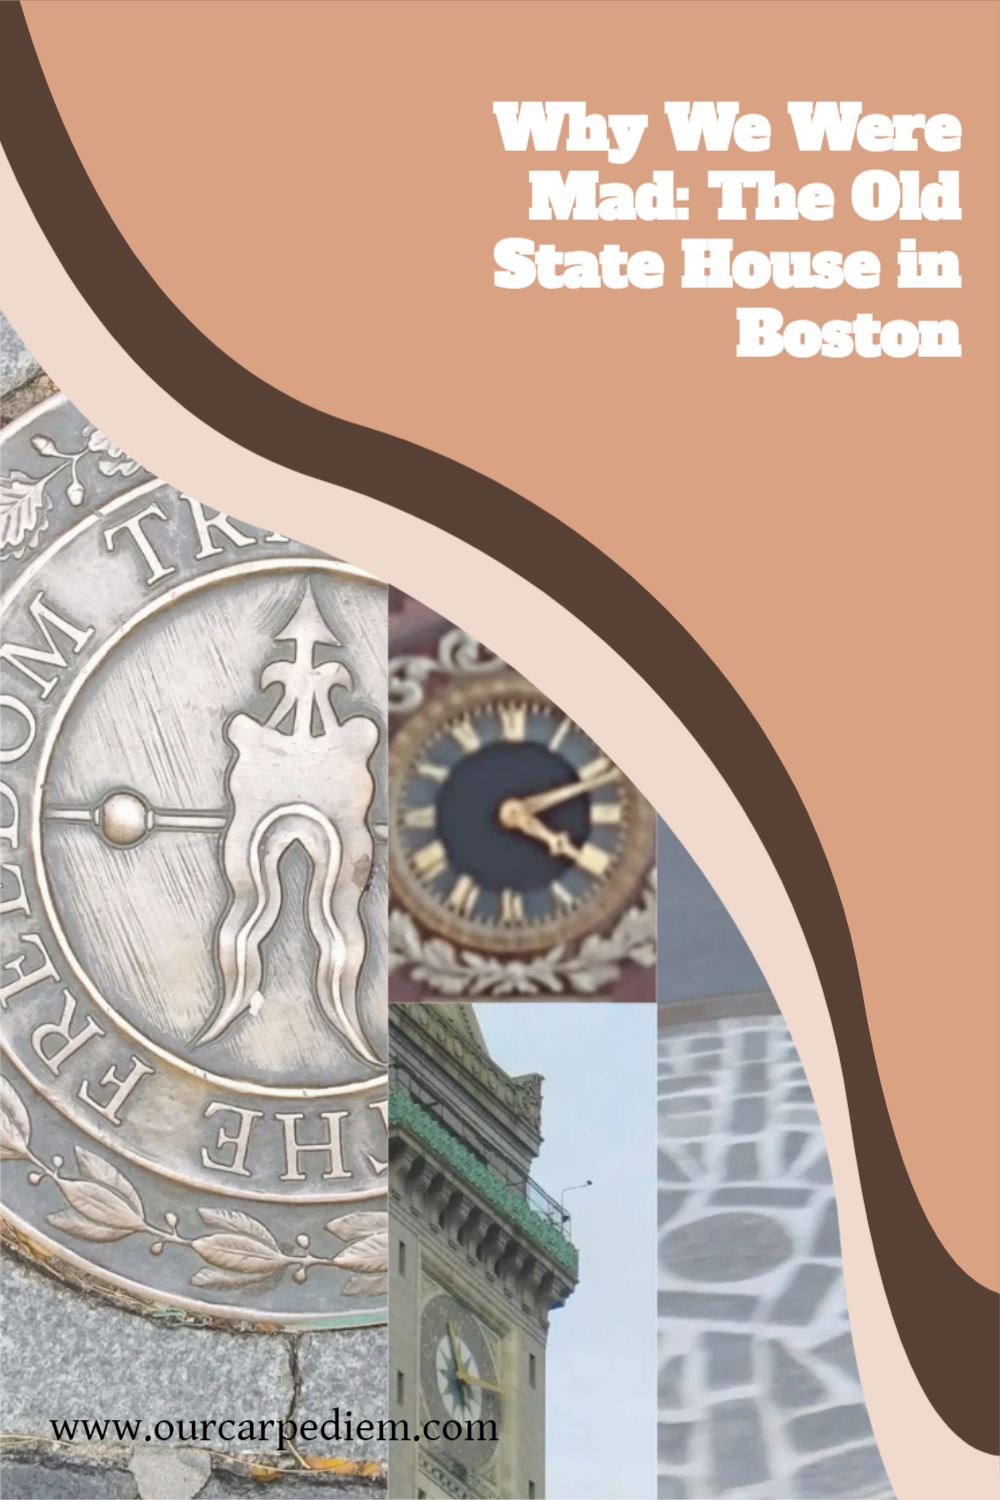 Why We Were Mad: The Old State House in Boston